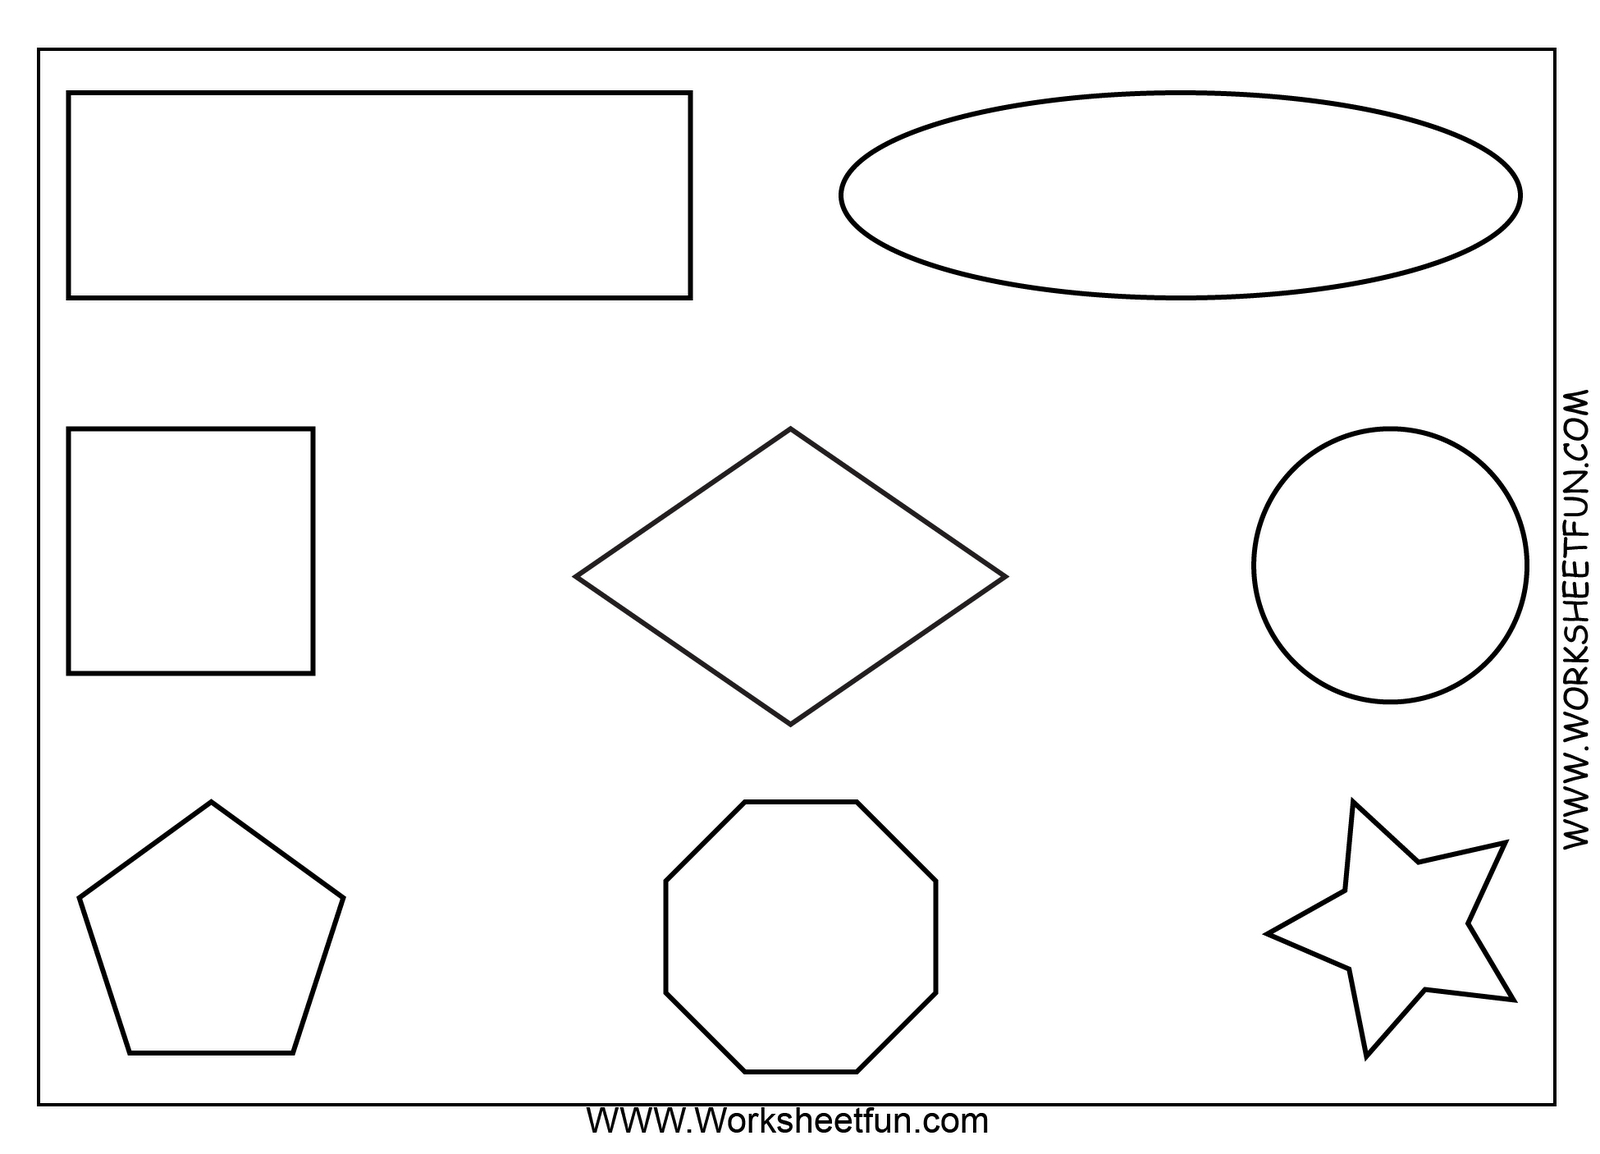 Free Printable Math Worksheets. Use As An Oral Direction Exam. Ex - Free Printable Shapes Worksheets